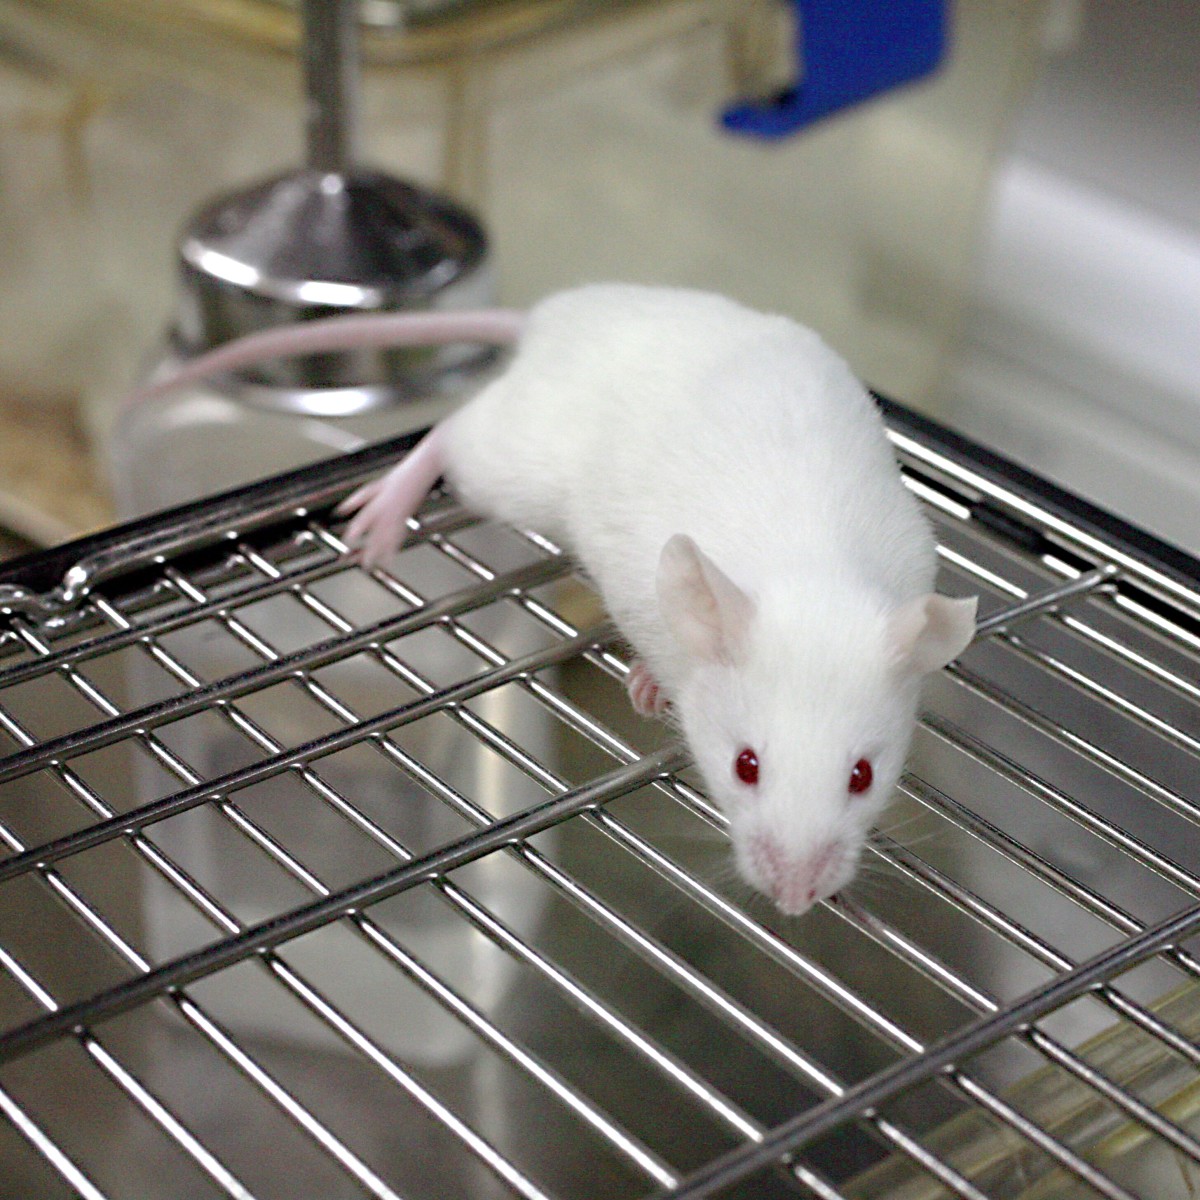 Results of experiments performed with lab mice often—but not always—apply to humans, too.